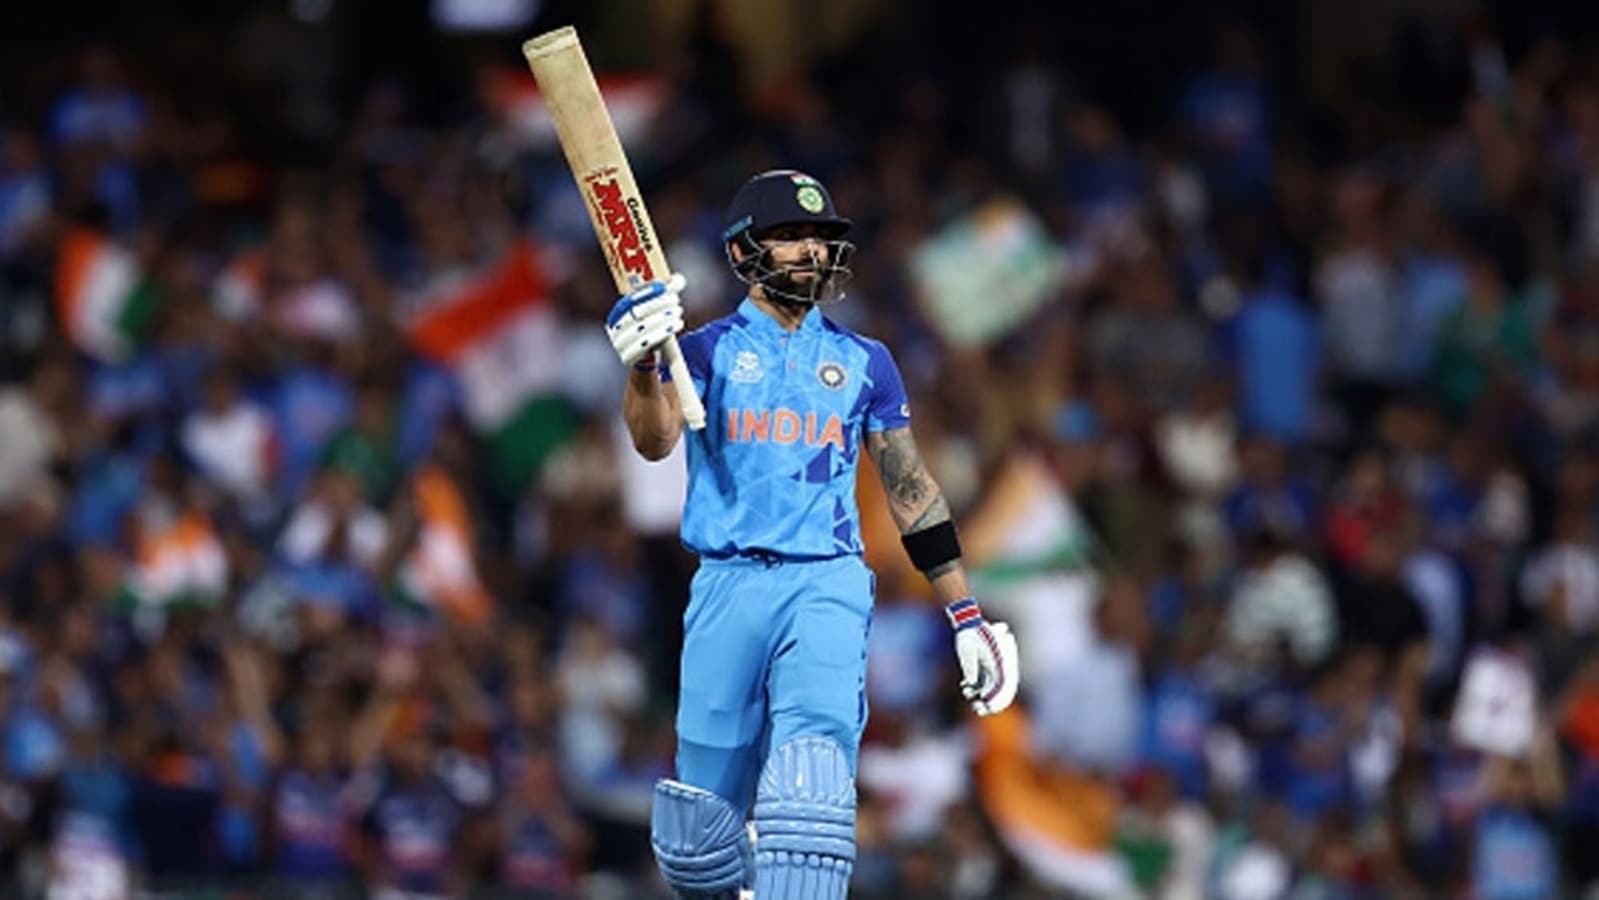 Happy Birthday Virat Kohli The King is back and lighting up the T20